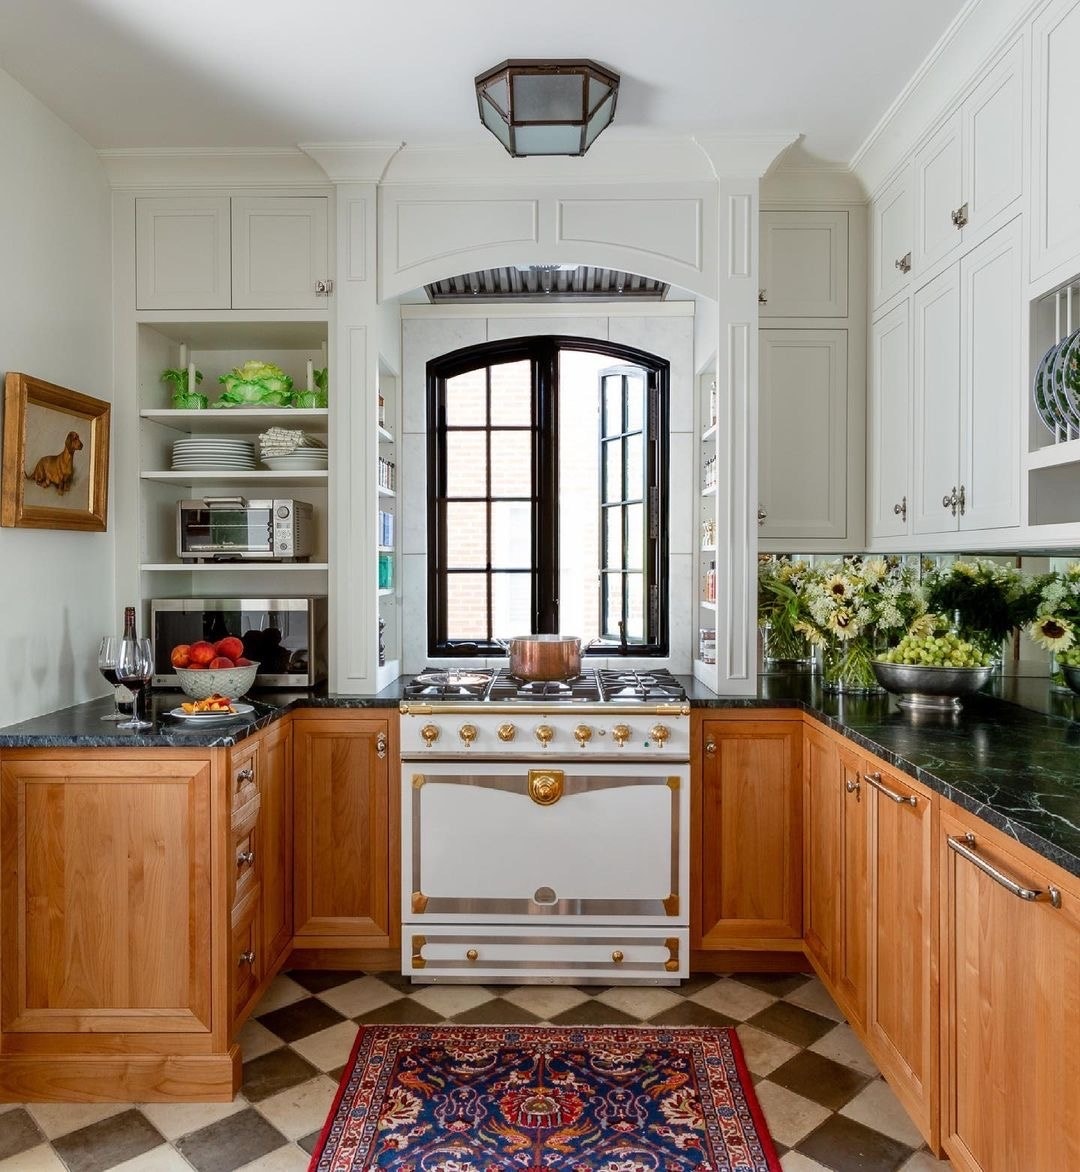 In a kitchen is a black arch window over stove.